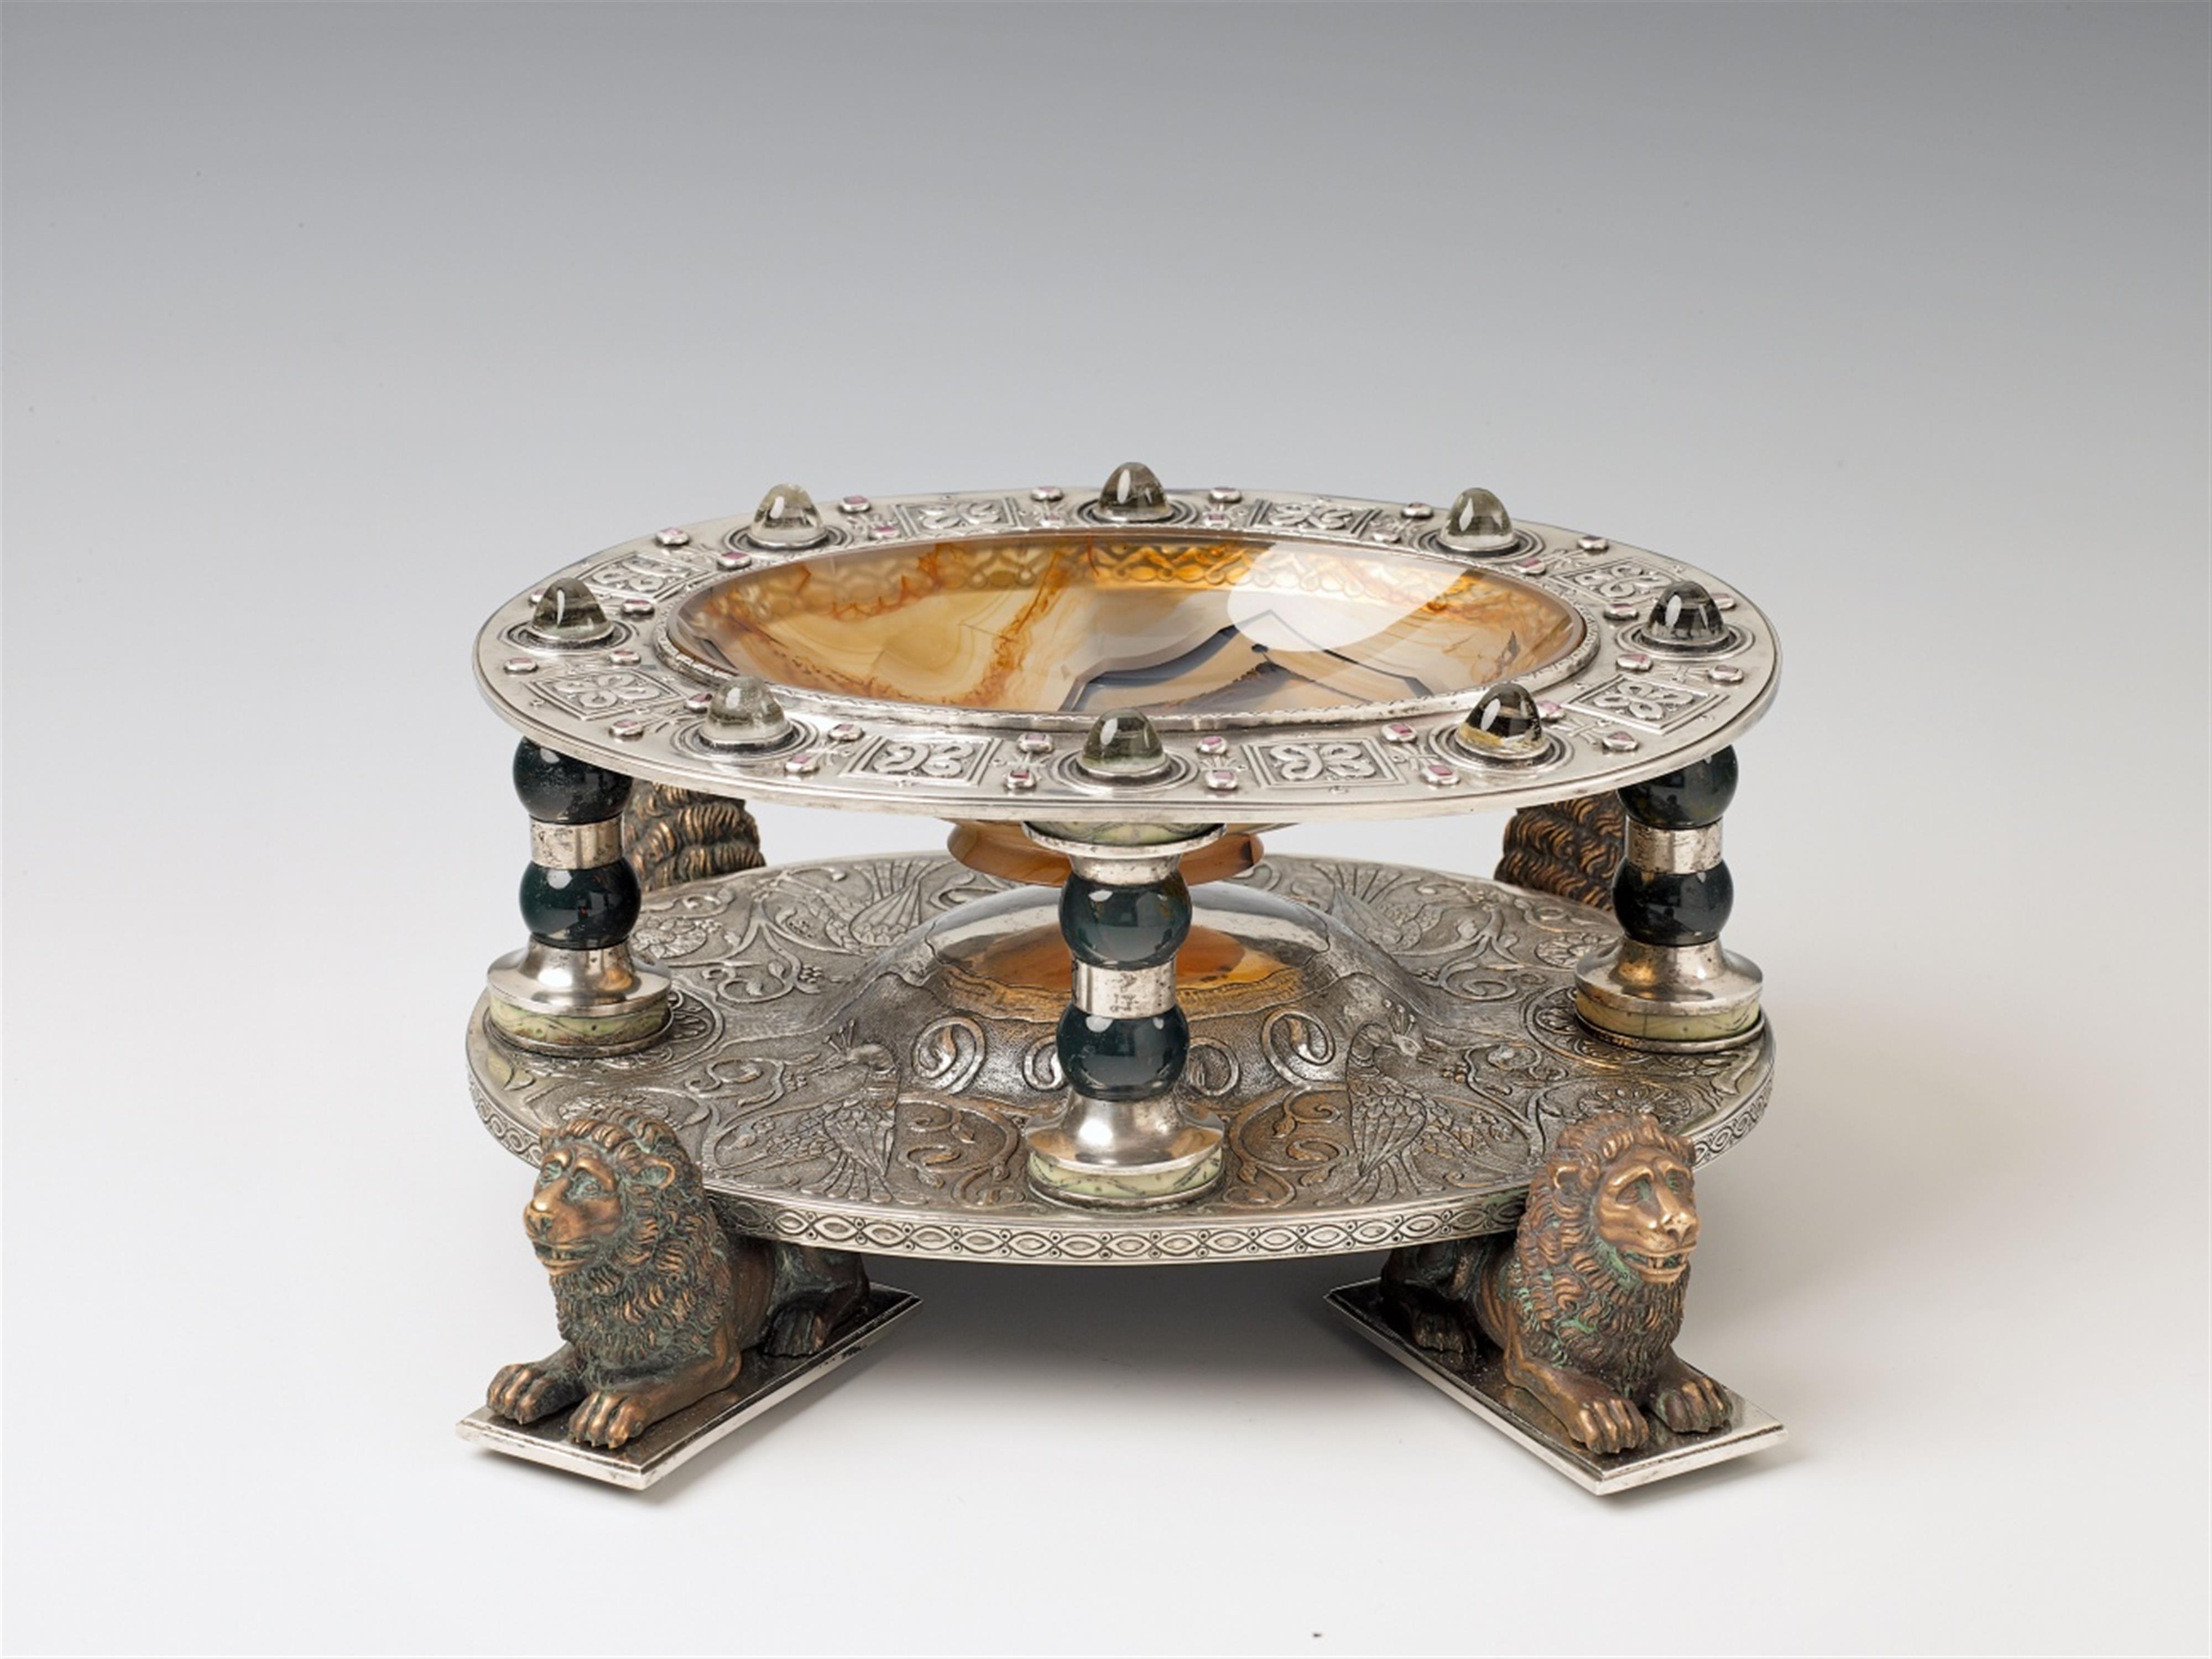 An opulent Aachen silver historicist dish. Mounted on four bronze lions, set with coloured stone and rock crystal cabochons. With an agate dish to the central element, supported by four jasper columns. Marks of Johann Heinrich Hubert Steenaerts, ca. 1860. - image-1